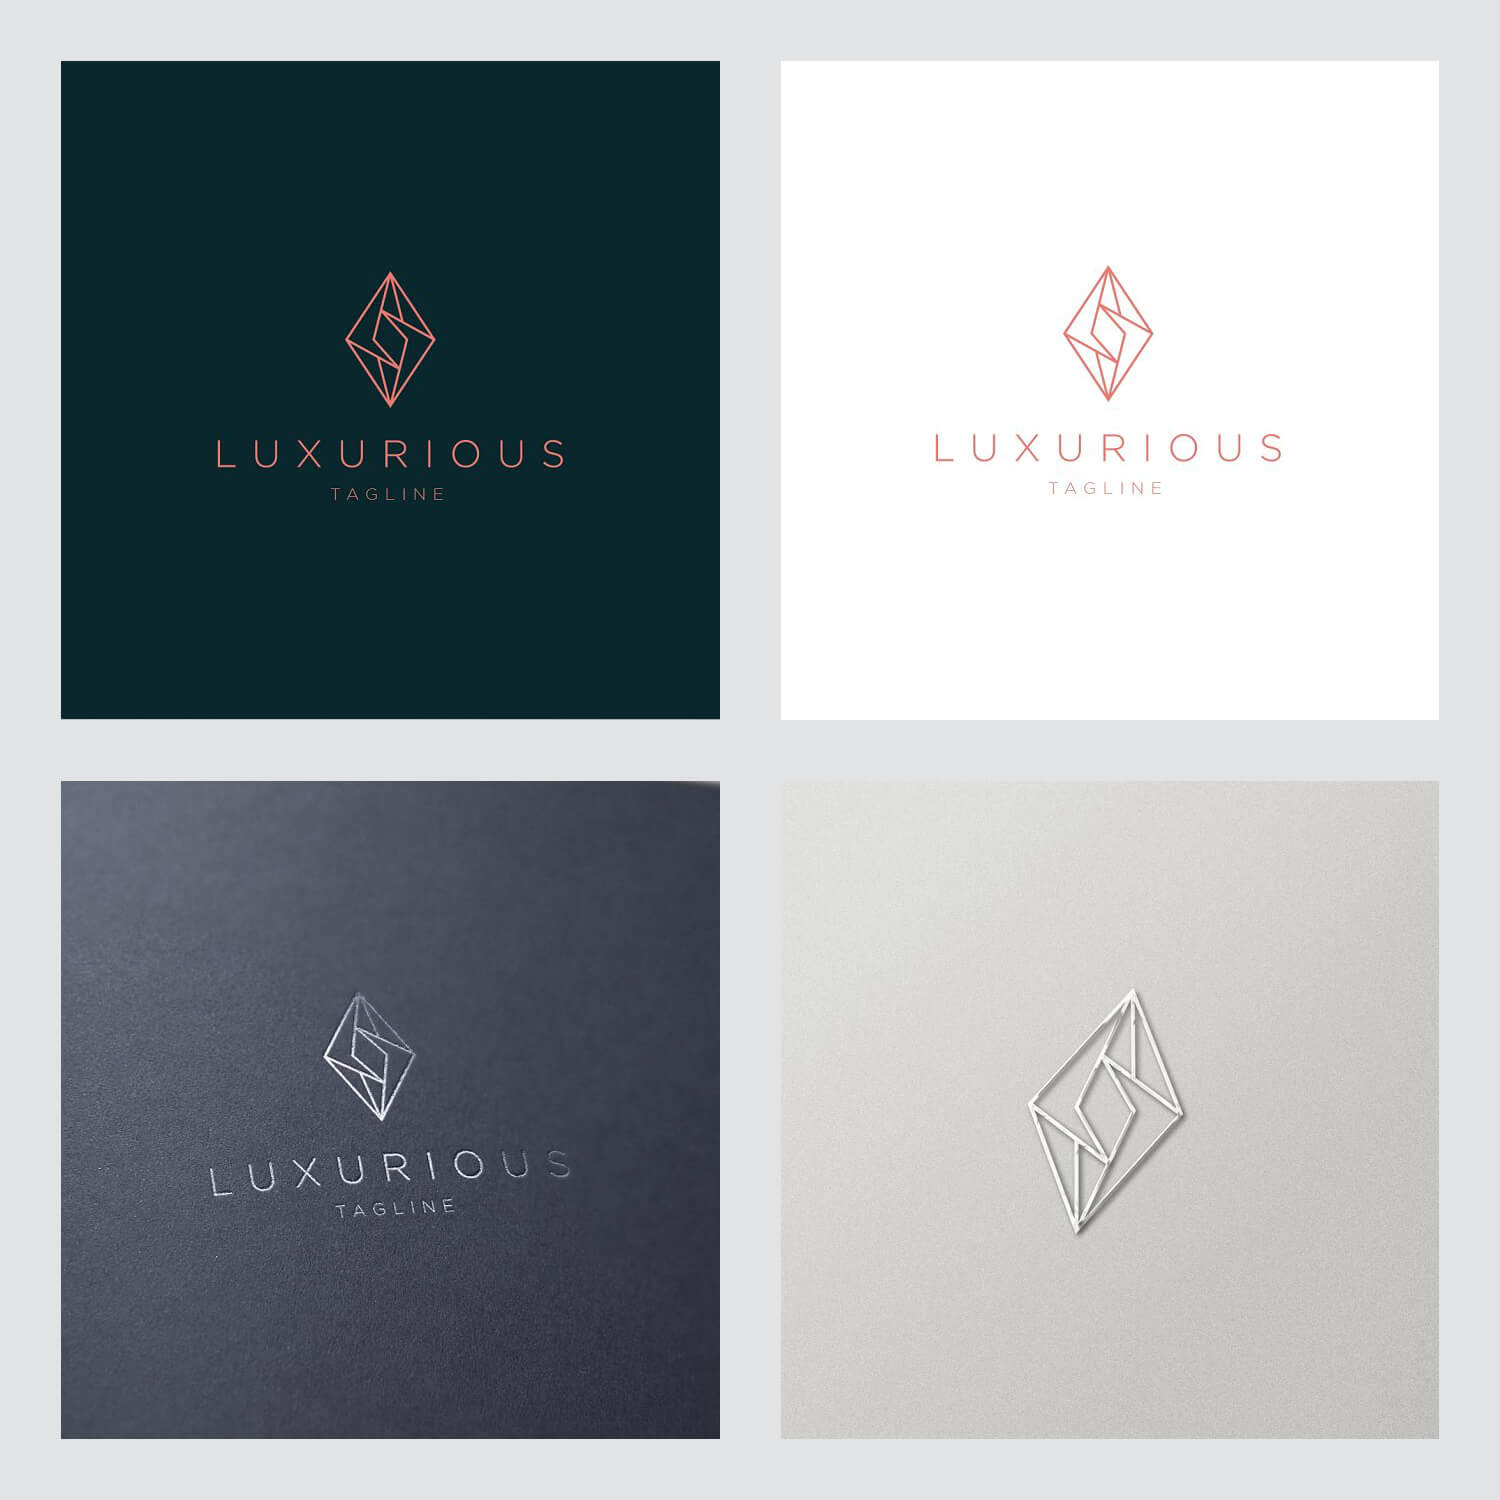 Four luxury jewelry logos in the form of squares on a light gray background.